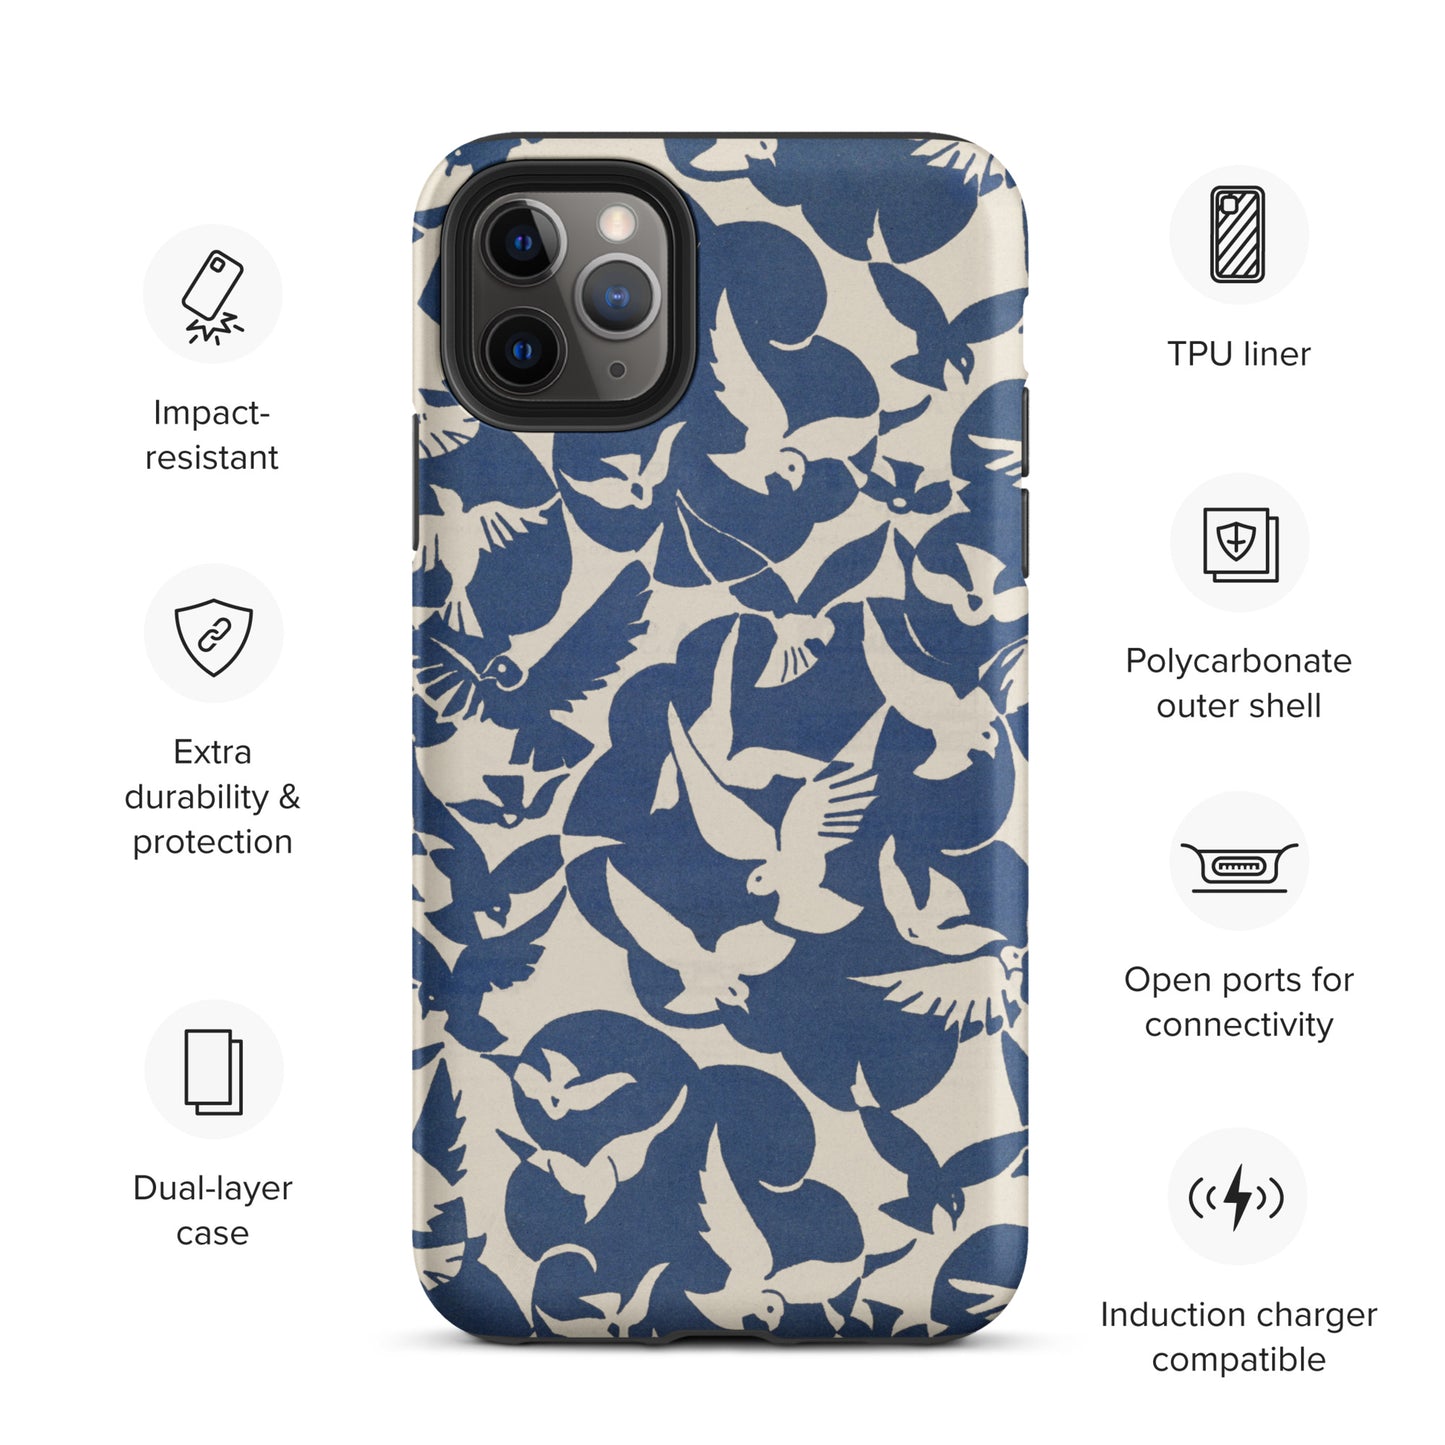 Pigeons in Rijksmuseum White and Blue Pattern - Tough iPhone case